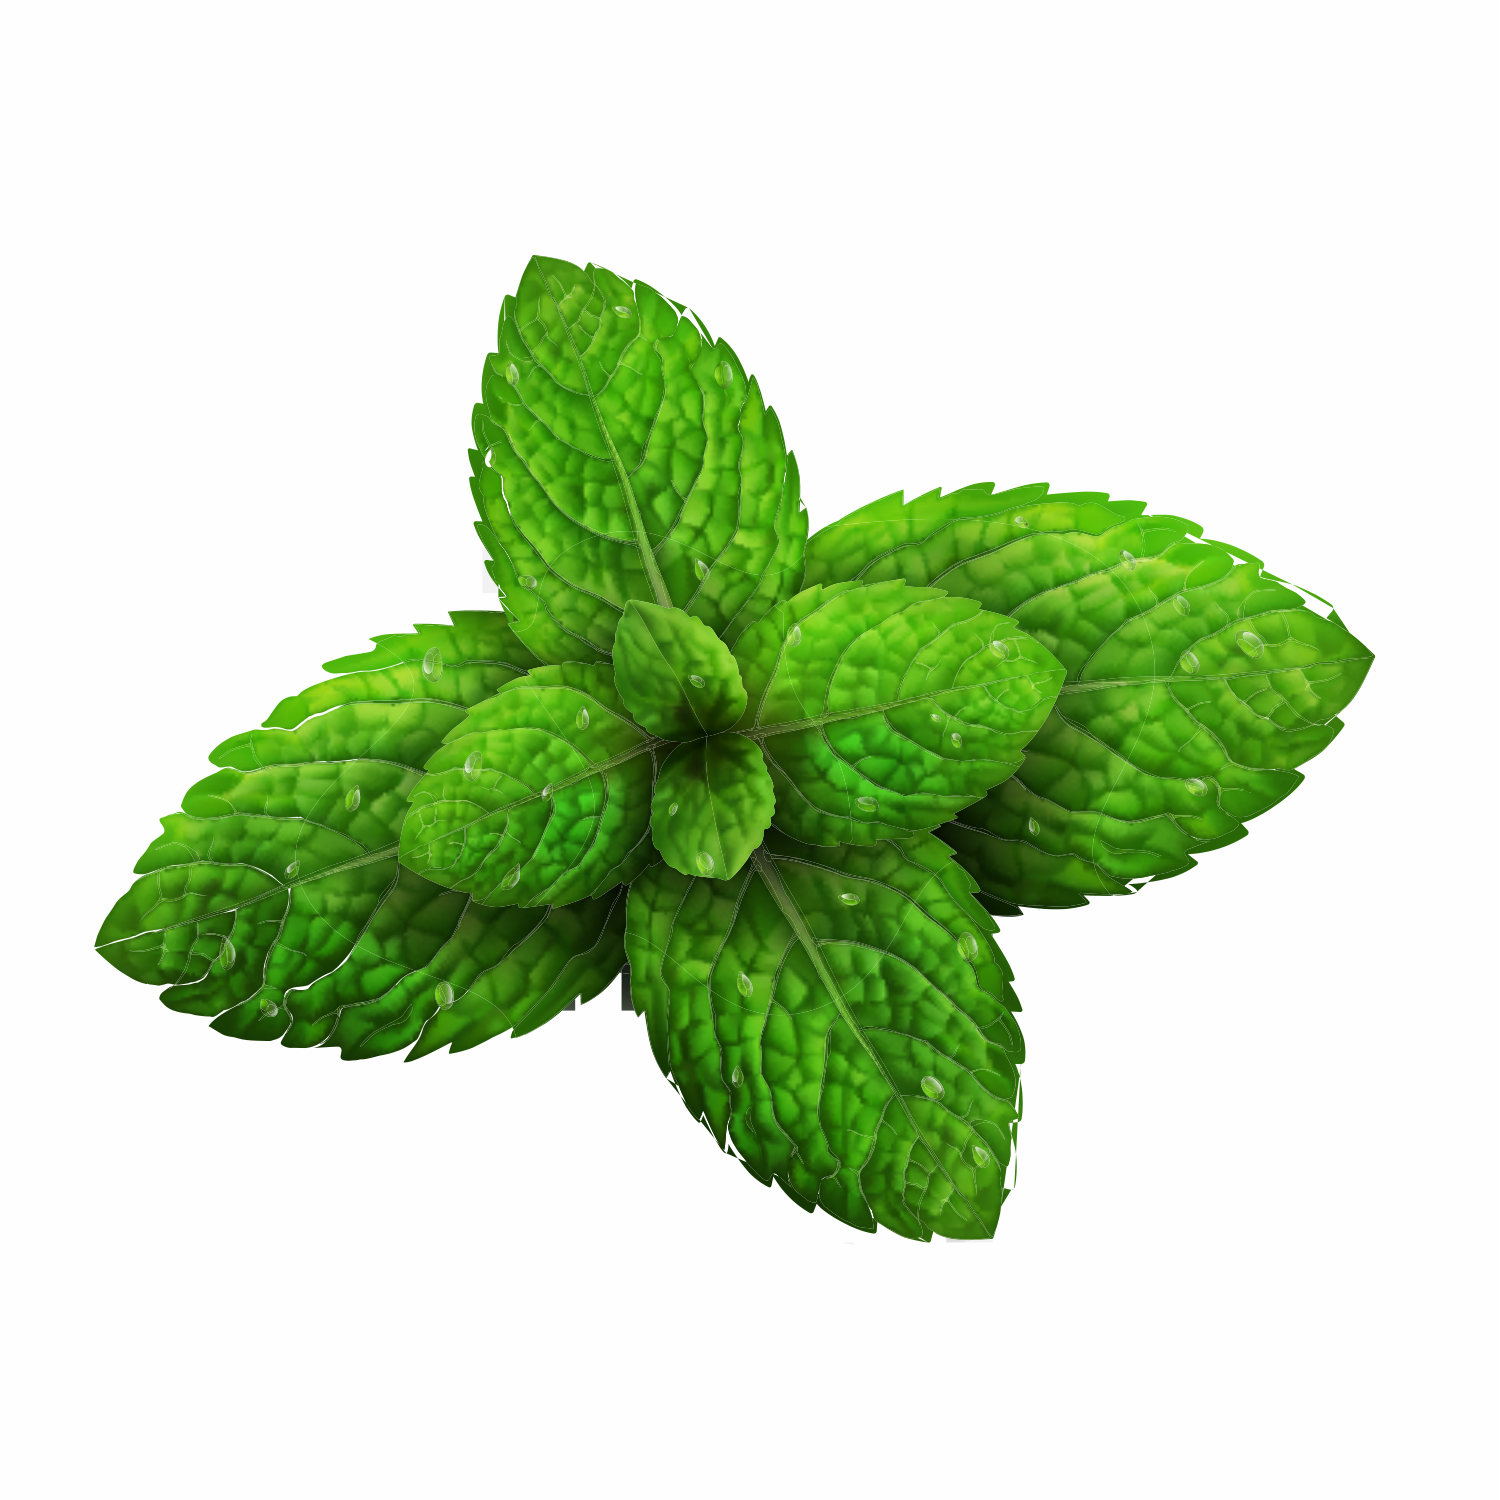 Mentha Piperita (Peppermint) Leaf Extract: Wake Up Your Skin with the Zing of Peppermint!